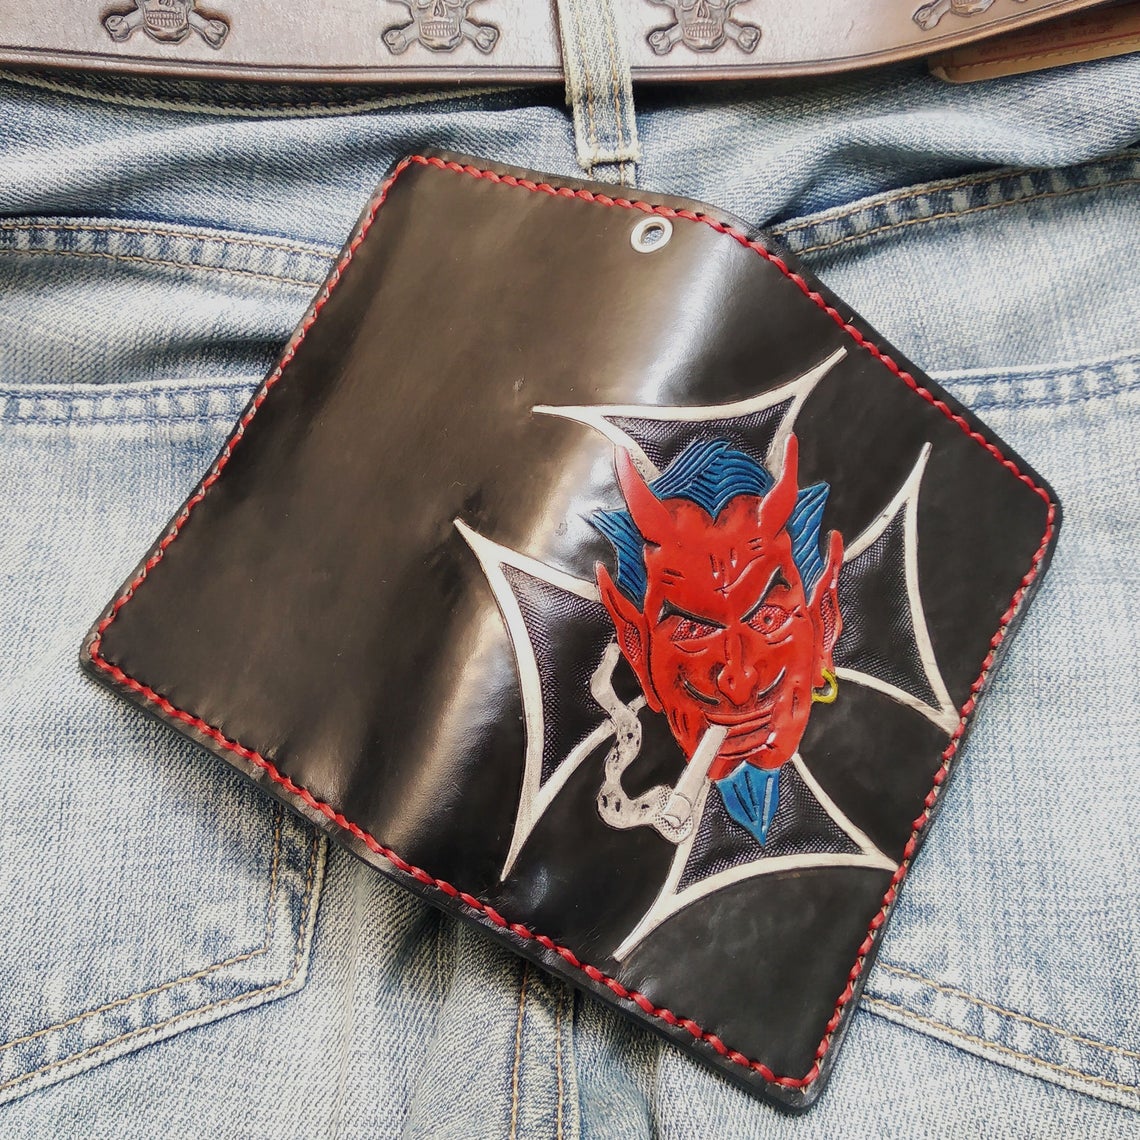 Handmade Leather Wallet Biker Style Engraved With Red Devil By Another Way of Life